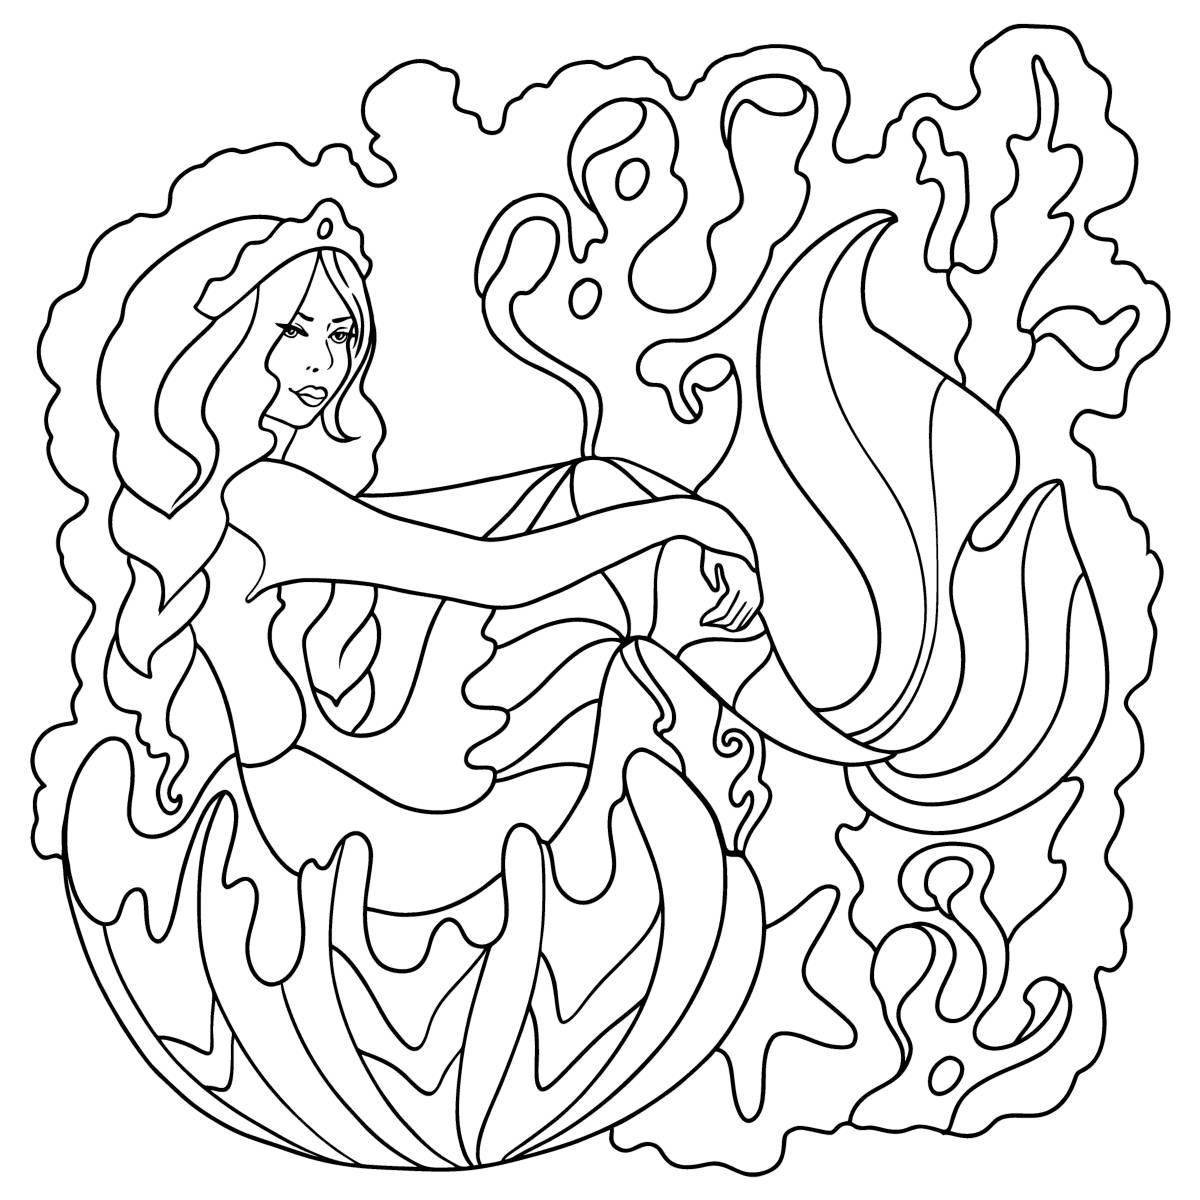 Exquisite little mermaid coloring by numbers